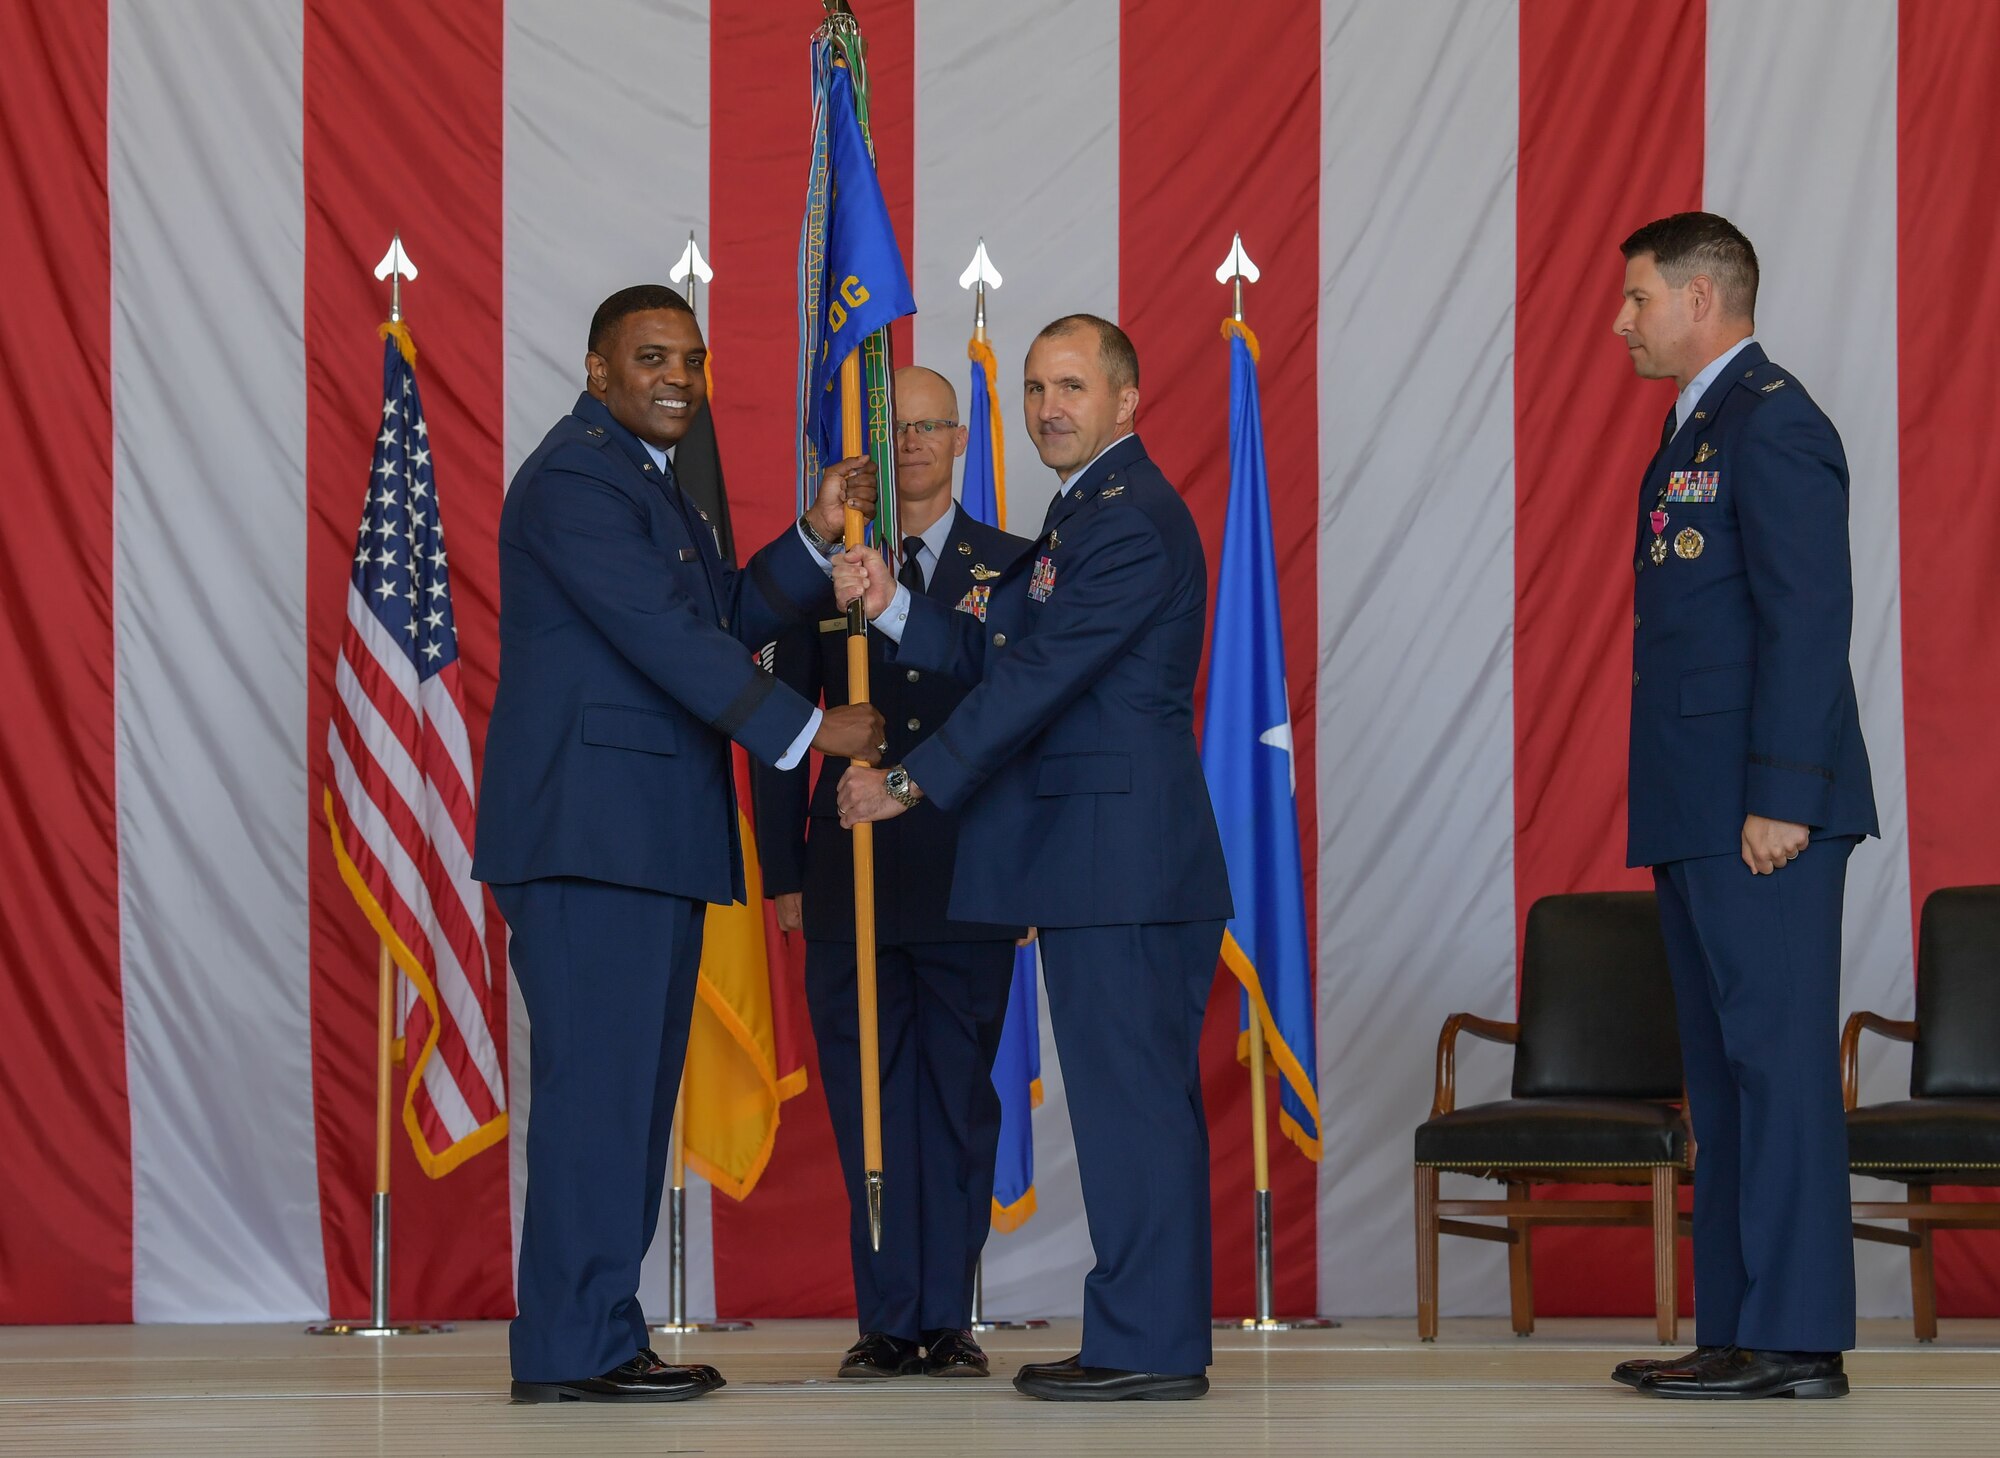 U.S. Air Force Brig. Gen. Otis C. Jones, 86th Airlift Wing commander, left, passes the 86th Operations Group guidon to Col. Bret Echard, 86th OG in-coming commander, middle, during the 86th OG change of command ceremony at Ramstein Air Base, Germany, June 15, 2023. The operations group consists of 14 C-130J Super Hercules aircraft, five C-21A Learjets aircraft and one C-37A Gulfstream V aircraft. (U.S. Air Force photo by Airman Trevor Calvert)